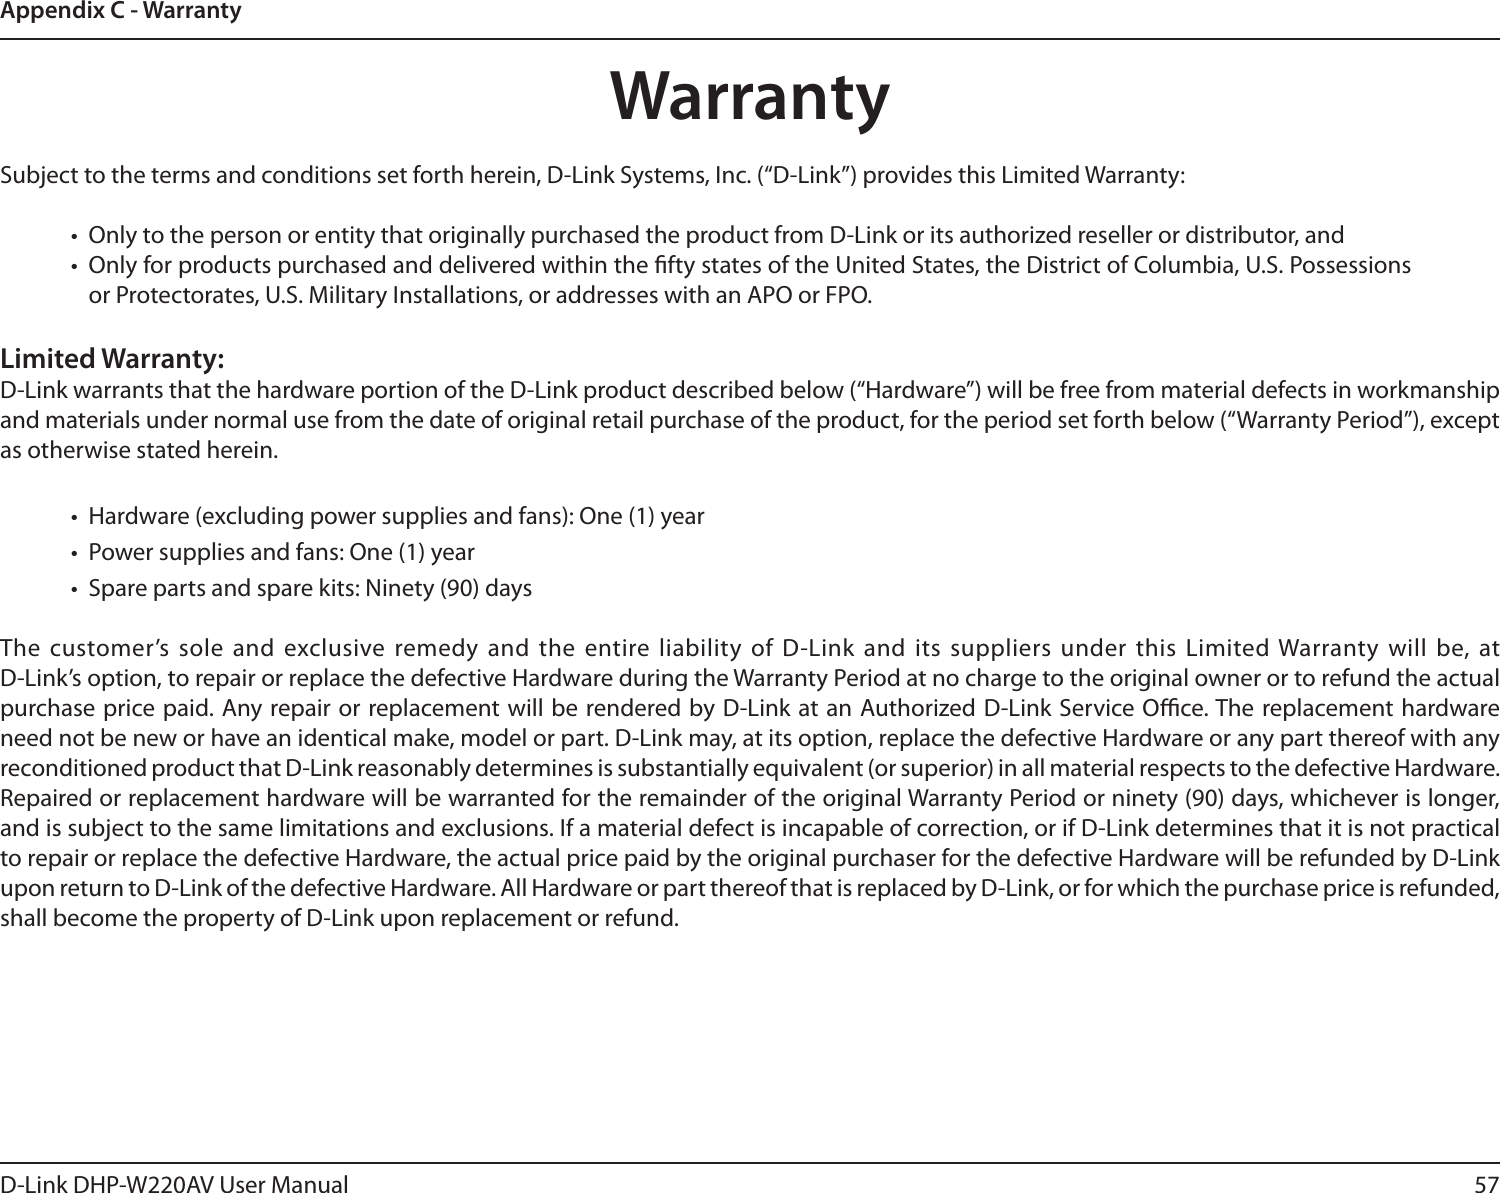 57D-Link DHP-W220AV User ManualAppendix C - WarrantyWarrantySubject to the terms and conditions set forth herein, D-Link Systems, Inc. (“D-Link”) provides this Limited Warranty:•  Only to the person or entity that originally purchased the product from D-Link or its authorized reseller or distributor, and•  Only for products purchased and delivered within the fty states of the United States, the District of Columbia, U.S. Possessions or Protectorates, U.S. Military Installations, or addresses with an APO or FPO.Limited Warranty:D-Link warrants that the hardware portion of the D-Link product described below (“Hardware”) will be free from material defects in workmanship and materials under normal use from the date of original retail purchase of the product, for the period set forth below (“Warranty Period”), except as otherwise stated herein.•  Hardware (excluding power supplies and fans): One (1) year•  Power supplies and fans: One (1) year•  Spare parts and spare kits: Ninety (90) daysThe customer’s sole and exclusive remedy and the entire liability of D-Link and its suppliers under this Limited Warranty will be, at  D-Link’s option, to repair or replace the defective Hardware during the Warranty Period at no charge to the original owner or to refund the actual purchase price paid. Any repair or replacement will be rendered by D-Link at an Authorized D-Link Service Oce. The replacement hardware need not be new or have an identical make, model or part. D-Link may, at its option, replace the defective Hardware or any part thereof with any reconditioned product that D-Link reasonably determines is substantially equivalent (or superior) in all material respects to the defective Hardware. Repaired or replacement hardware will be warranted for the remainder of the original Warranty Period or ninety (90) days, whichever is longer, and is subject to the same limitations and exclusions. If a material defect is incapable of correction, or if D-Link determines that it is not practical to repair or replace the defective Hardware, the actual price paid by the original purchaser for the defective Hardware will be refunded by D-Link upon return to D-Link of the defective Hardware. All Hardware or part thereof that is replaced by D-Link, or for which the purchase price is refunded, shall become the property of D-Link upon replacement or refund.